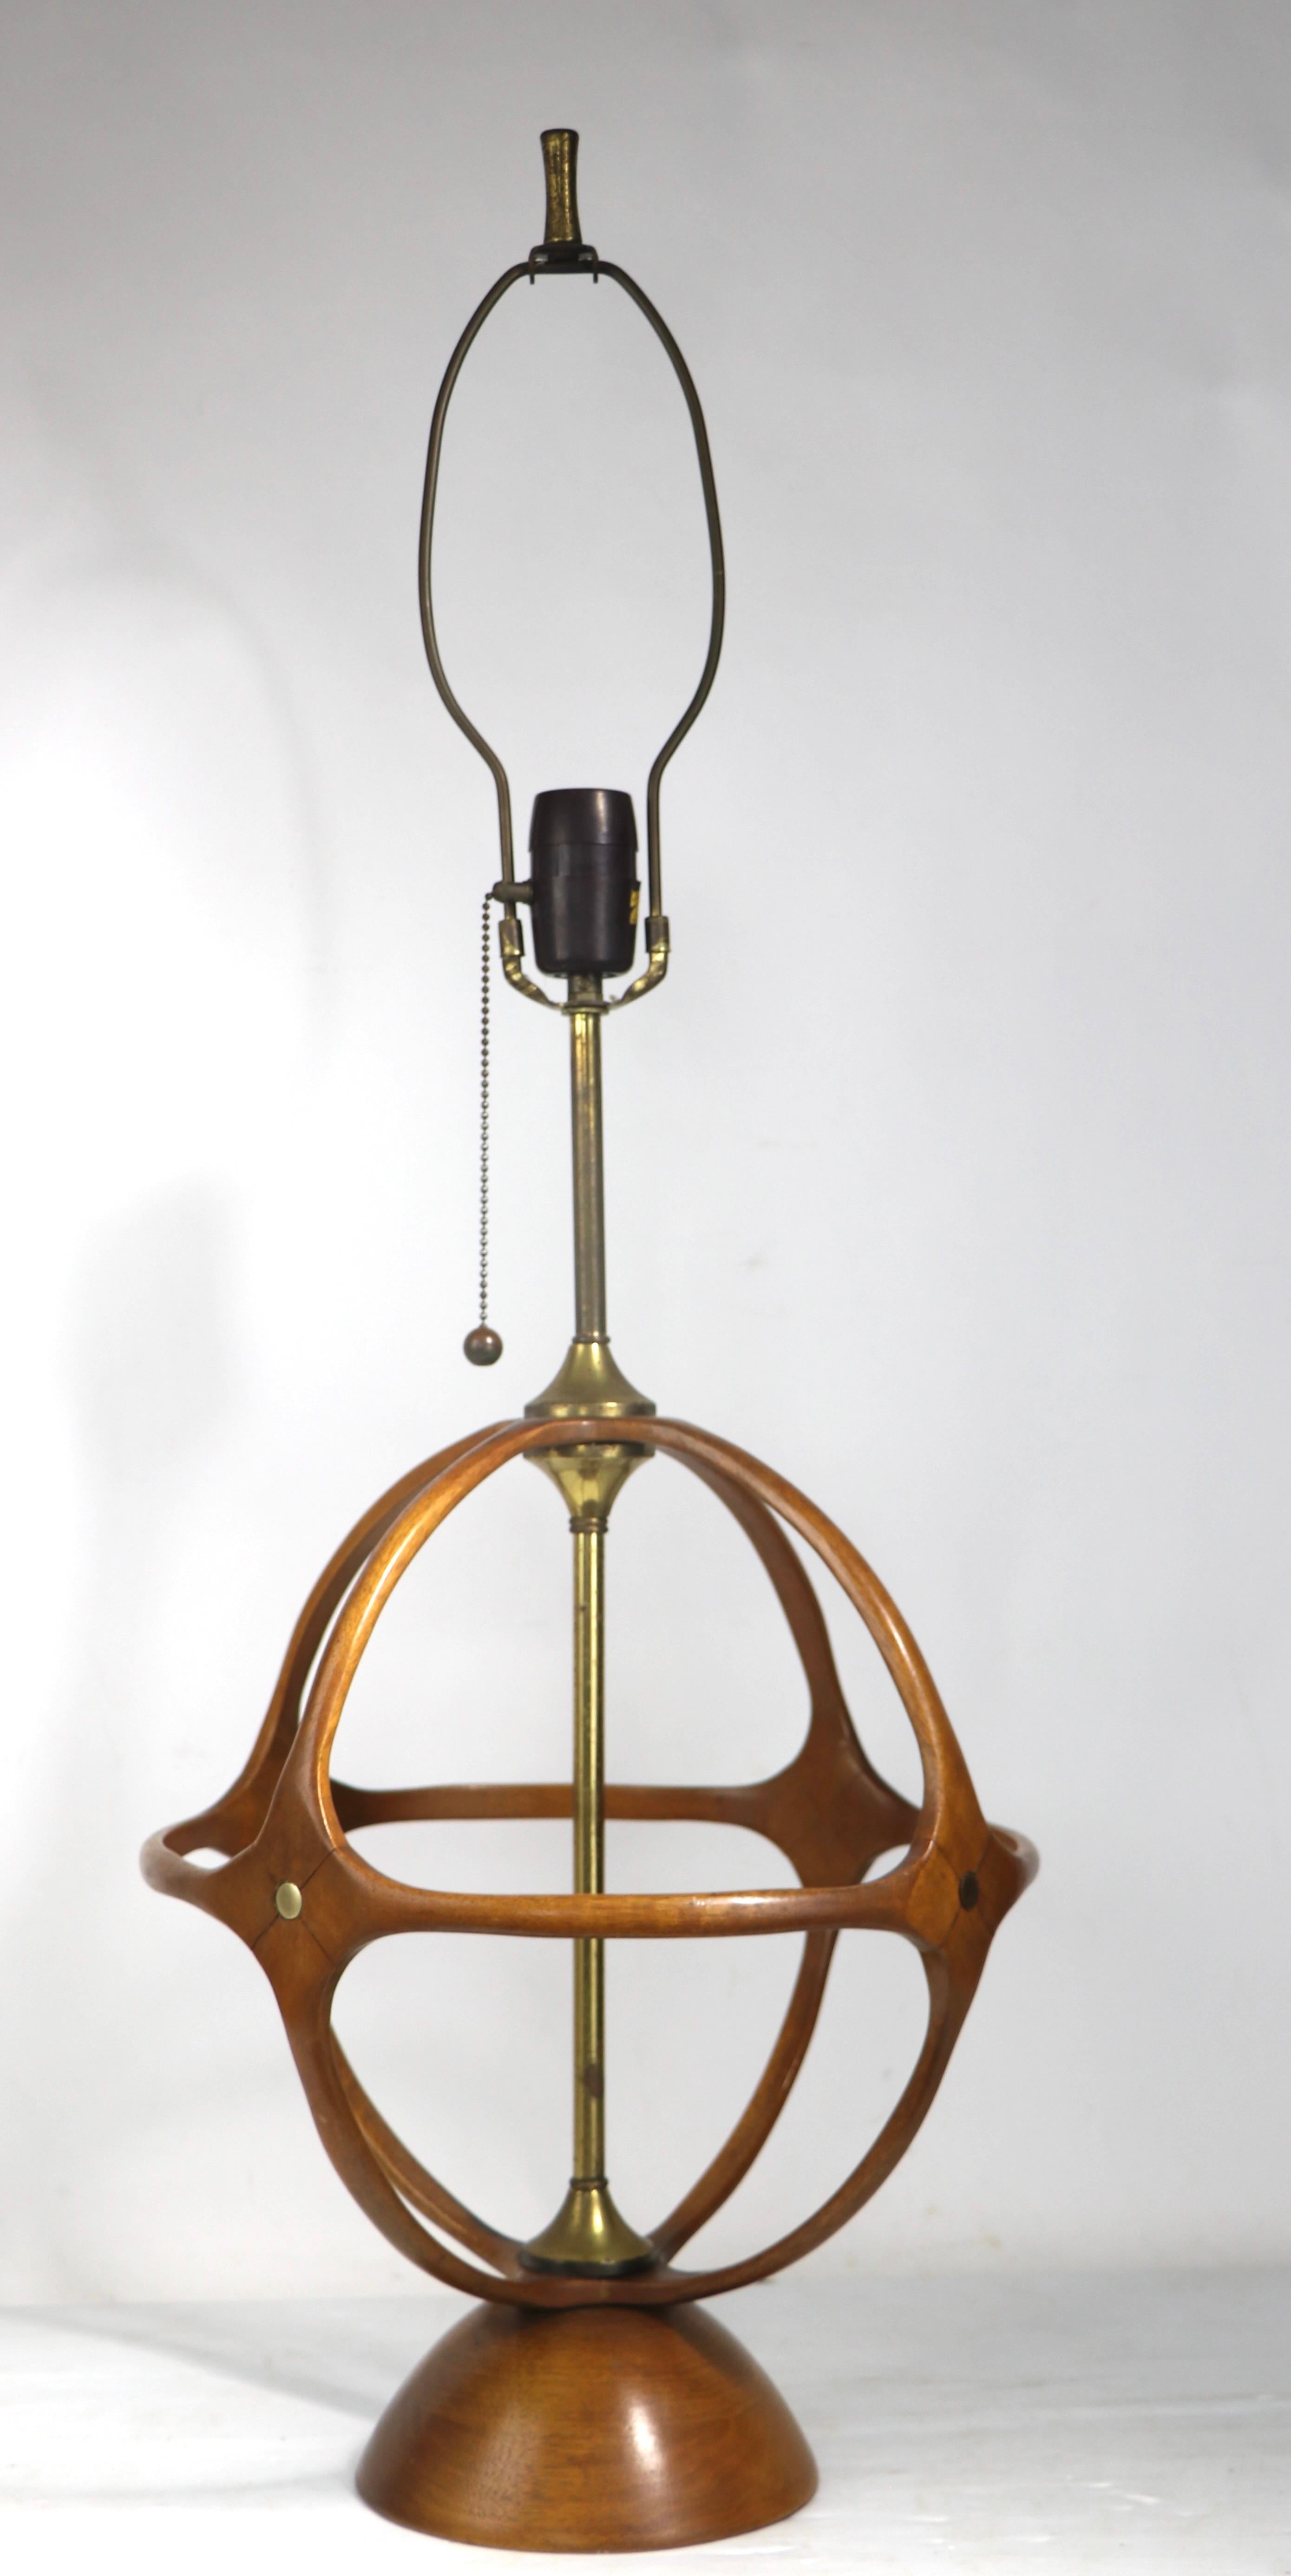 Wonderful architectural mid century table lamp by Modeline of California, in the style of Adrian Pearsall. The lamp features a ball, or globe form body of sculpted wood ( walnut ) with decorative brass highlights. This example is in excellent